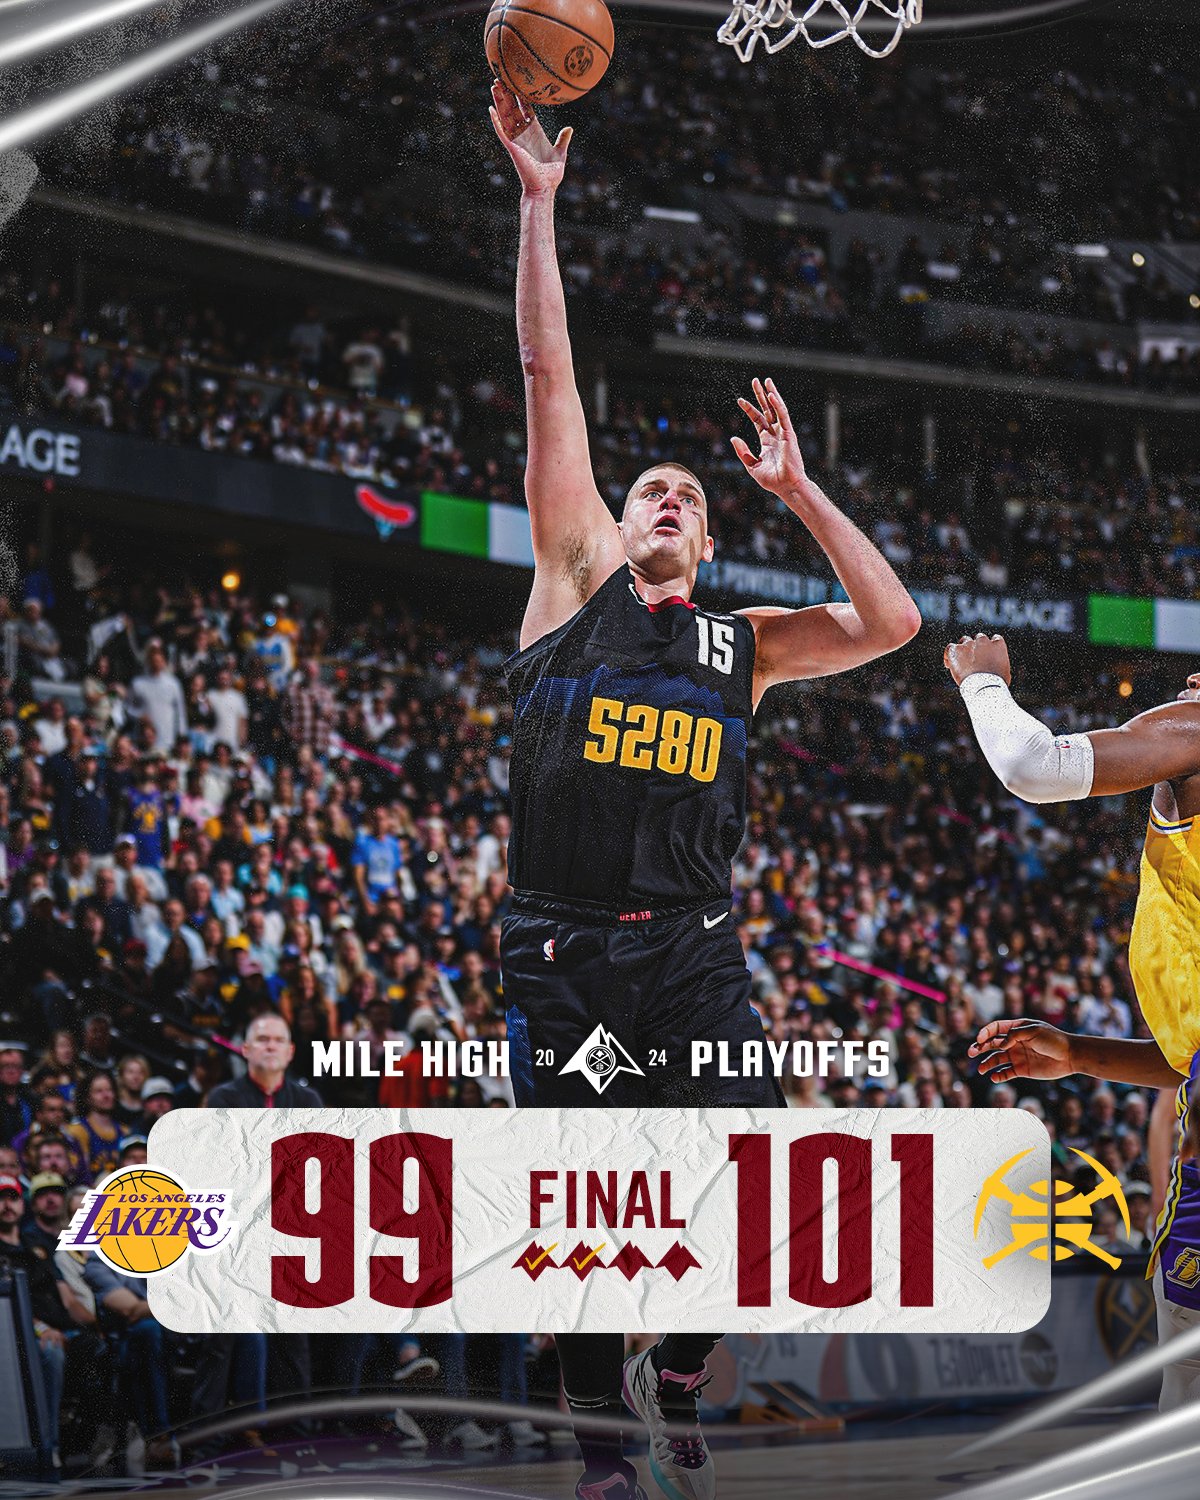 the Nuggets come back and beat the Lakers